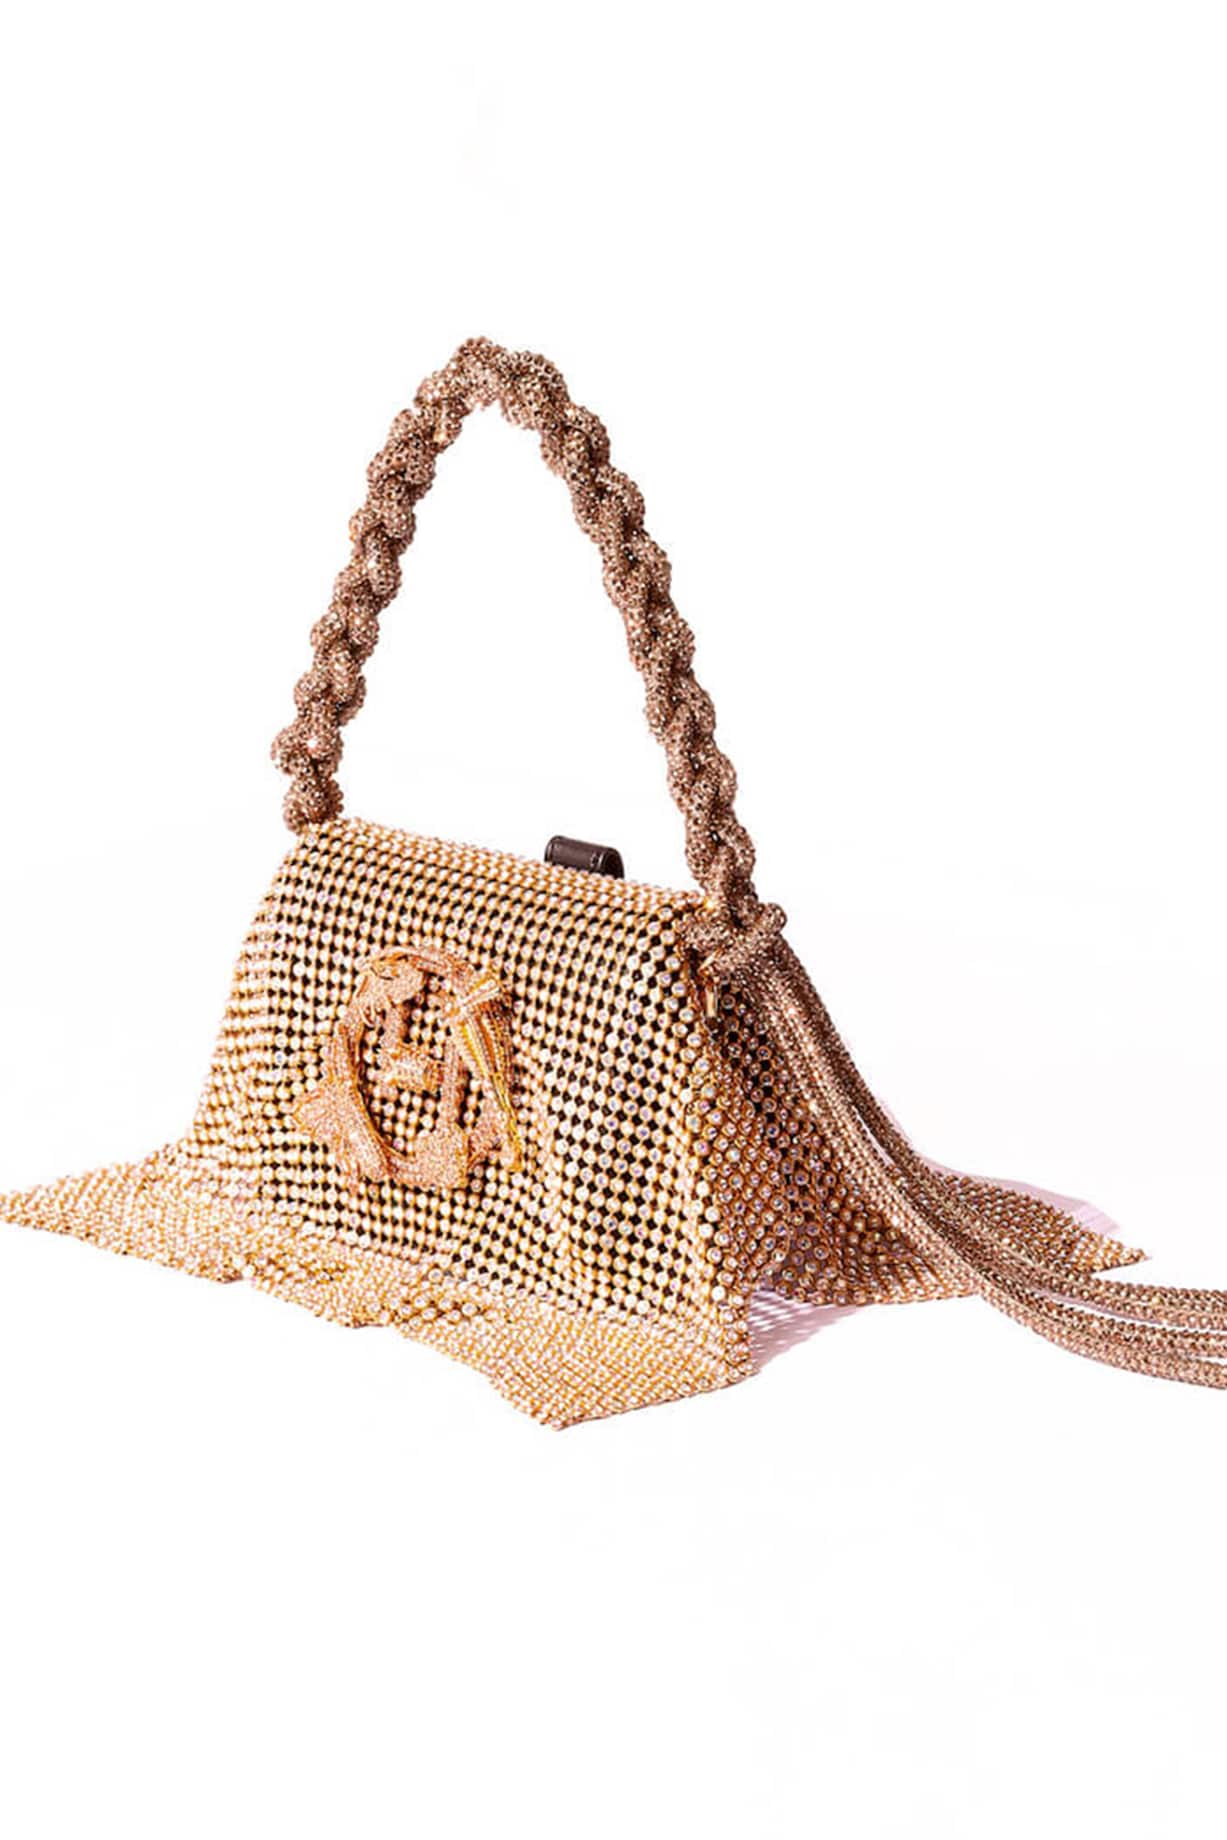 Gold Vegan Leather Bag with Rhinestones by Outhouse